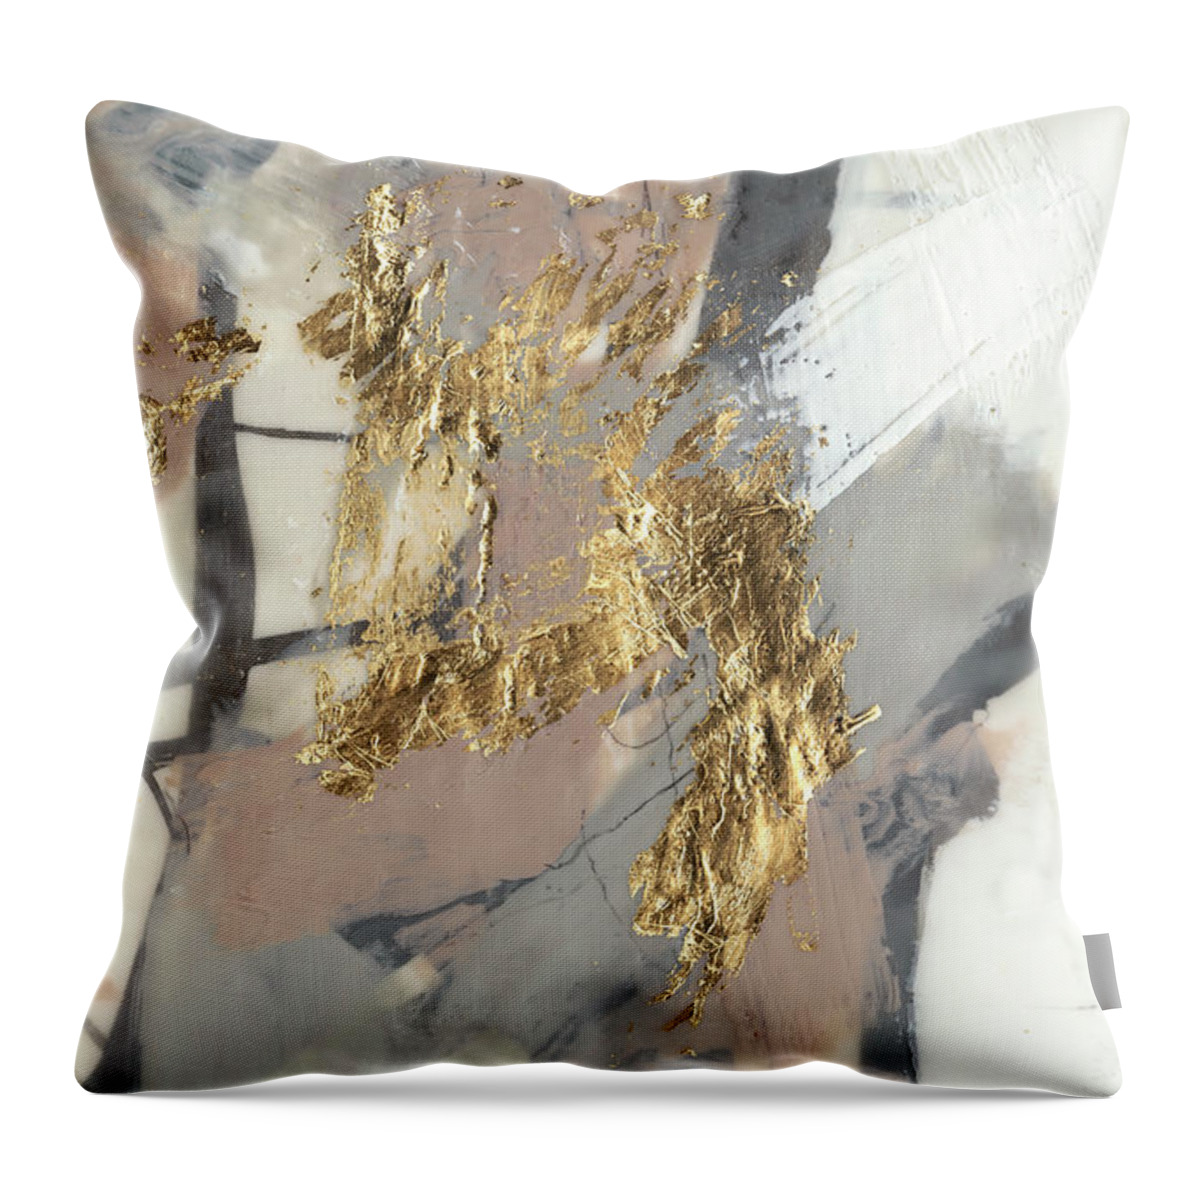 Embellished Throw Pillow featuring the painting Golden Blush II by Jennifer Goldberger